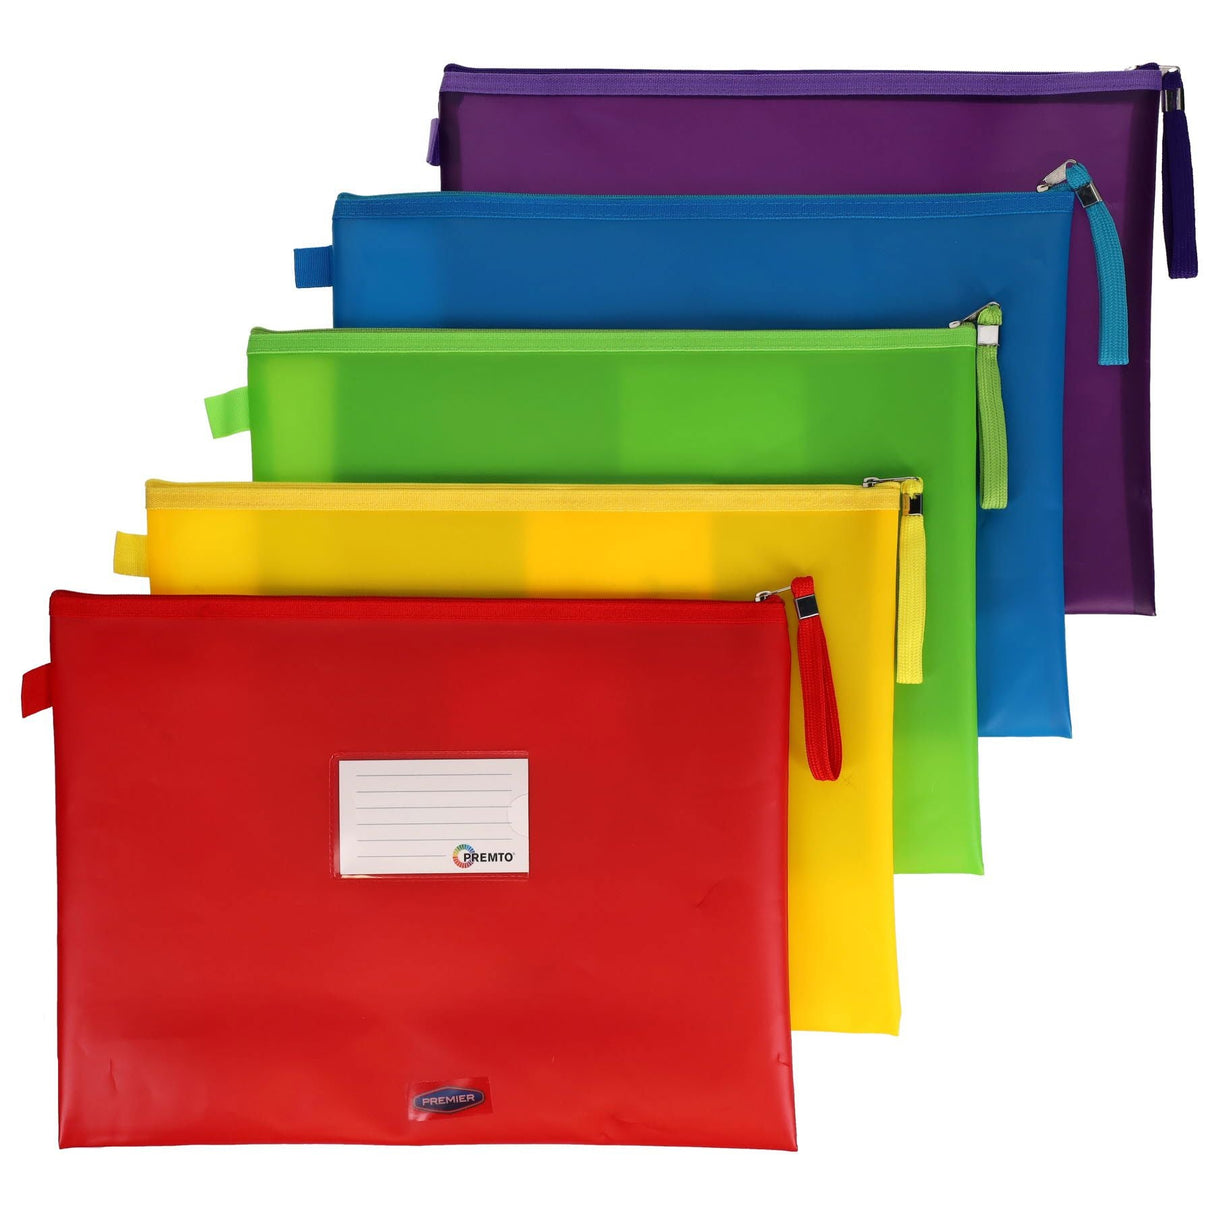 Premto A4+ Extra Durable Storage Wallets - Ice S1 - Pack of 5 | Stationery Shop UK